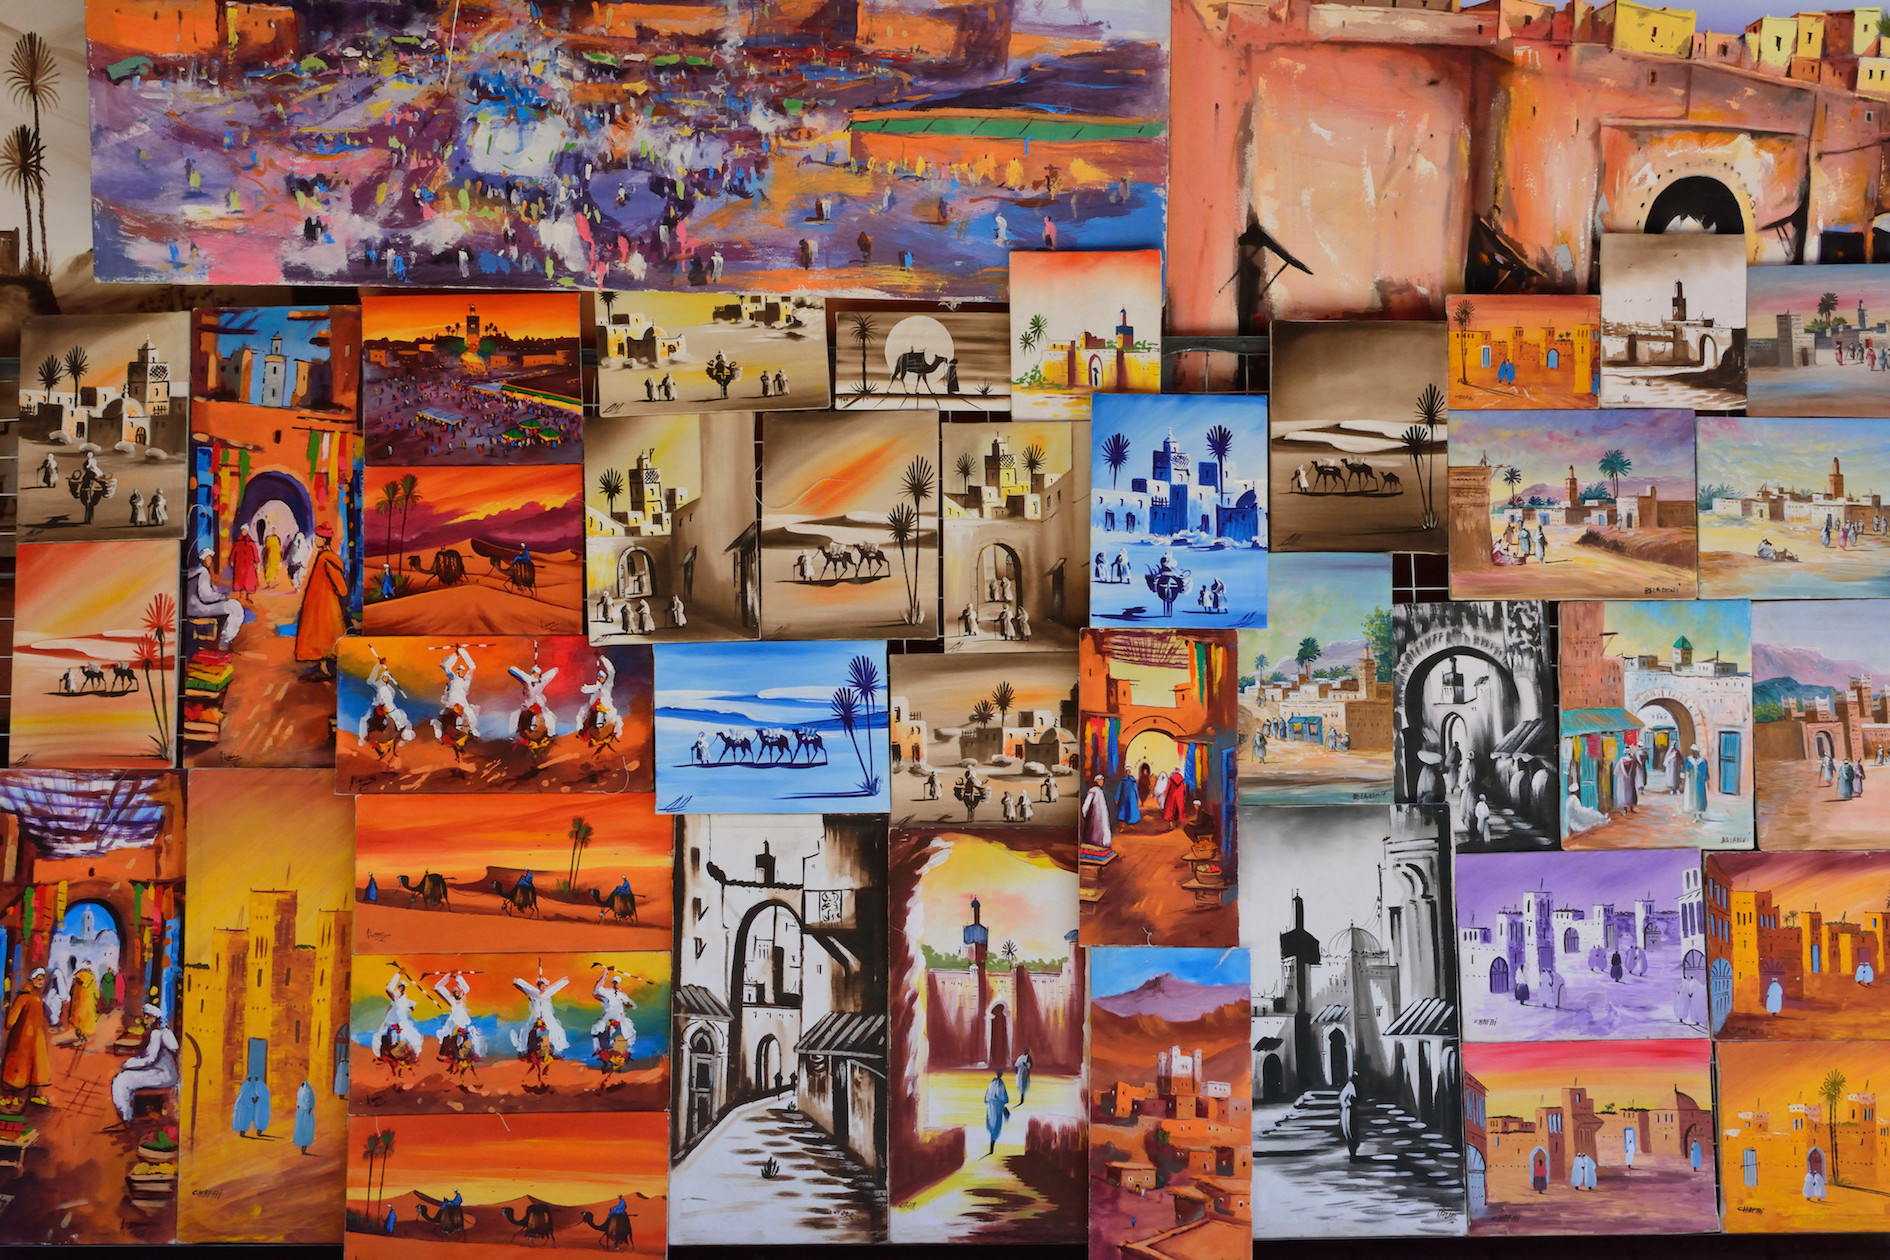 A wall of colourful artworks featuring Moroccan imagery